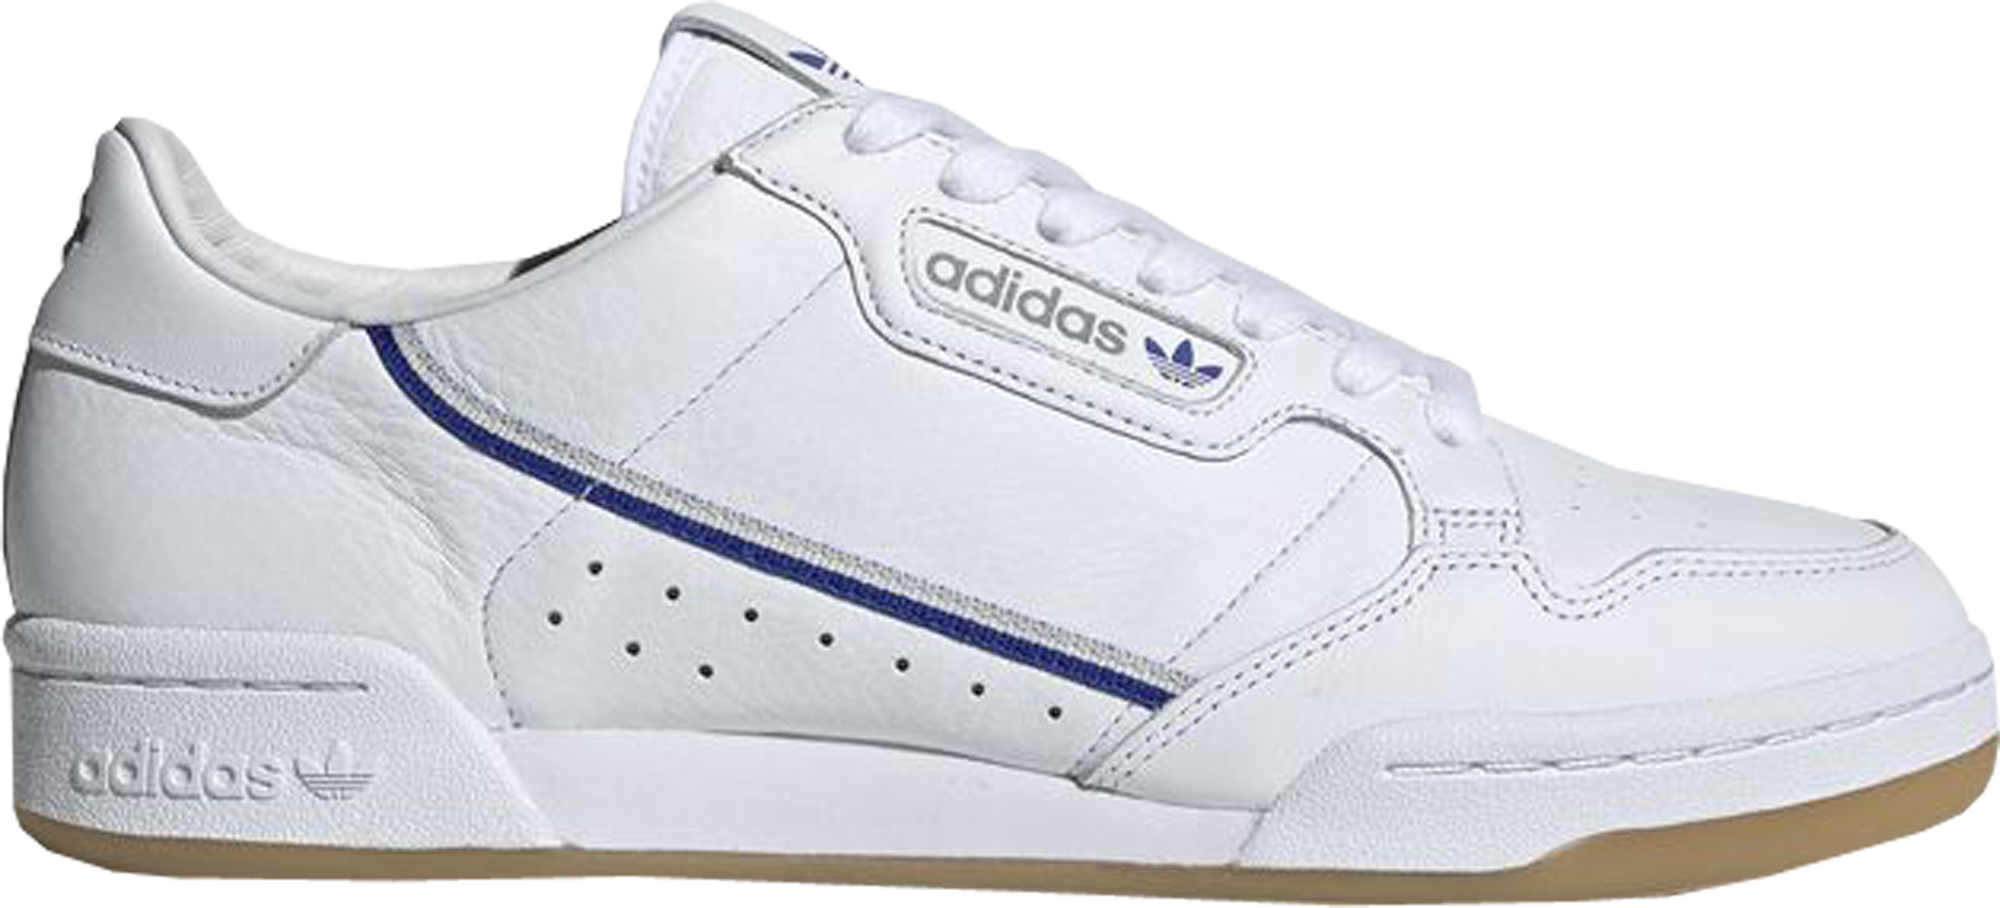 adidas continental blue and white